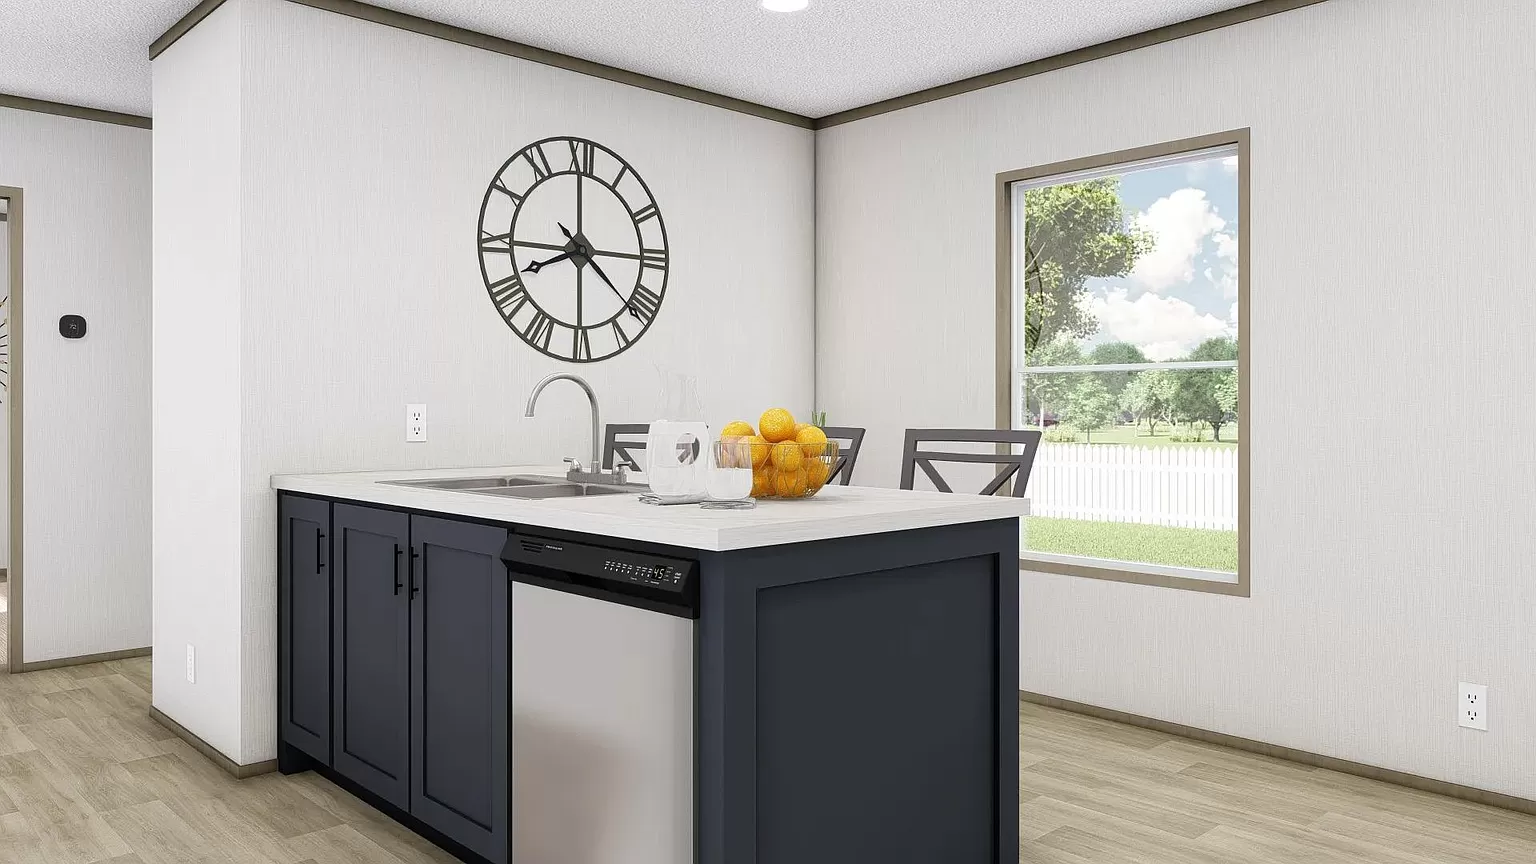 Kitchen island with sink, dishwasher, and clock.